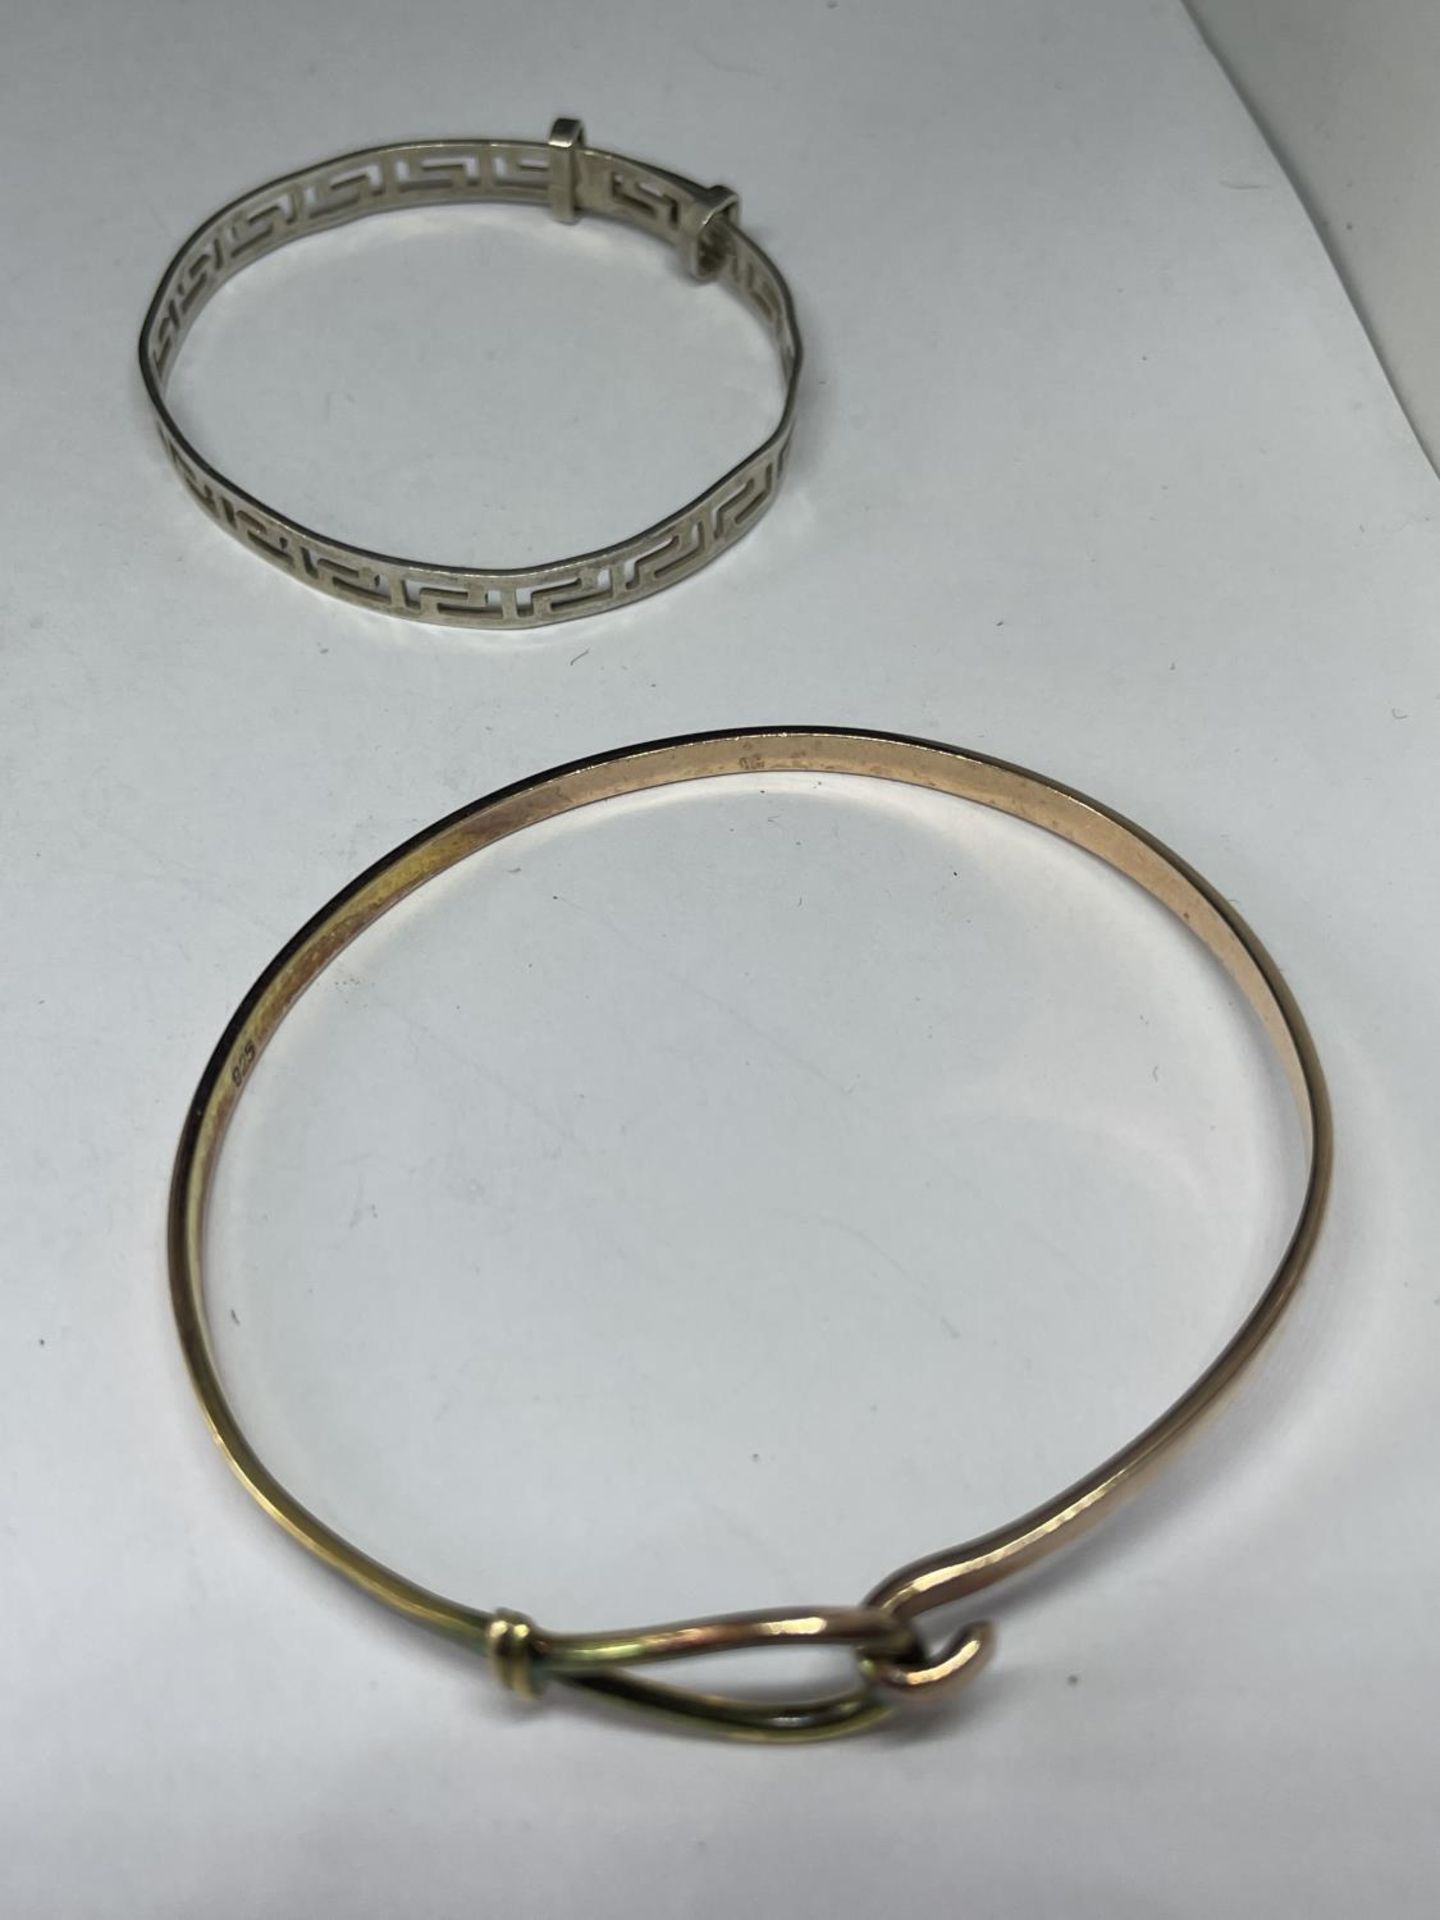 FOUR VARIOUS MARKED SILVER BANGLES - Image 3 of 3